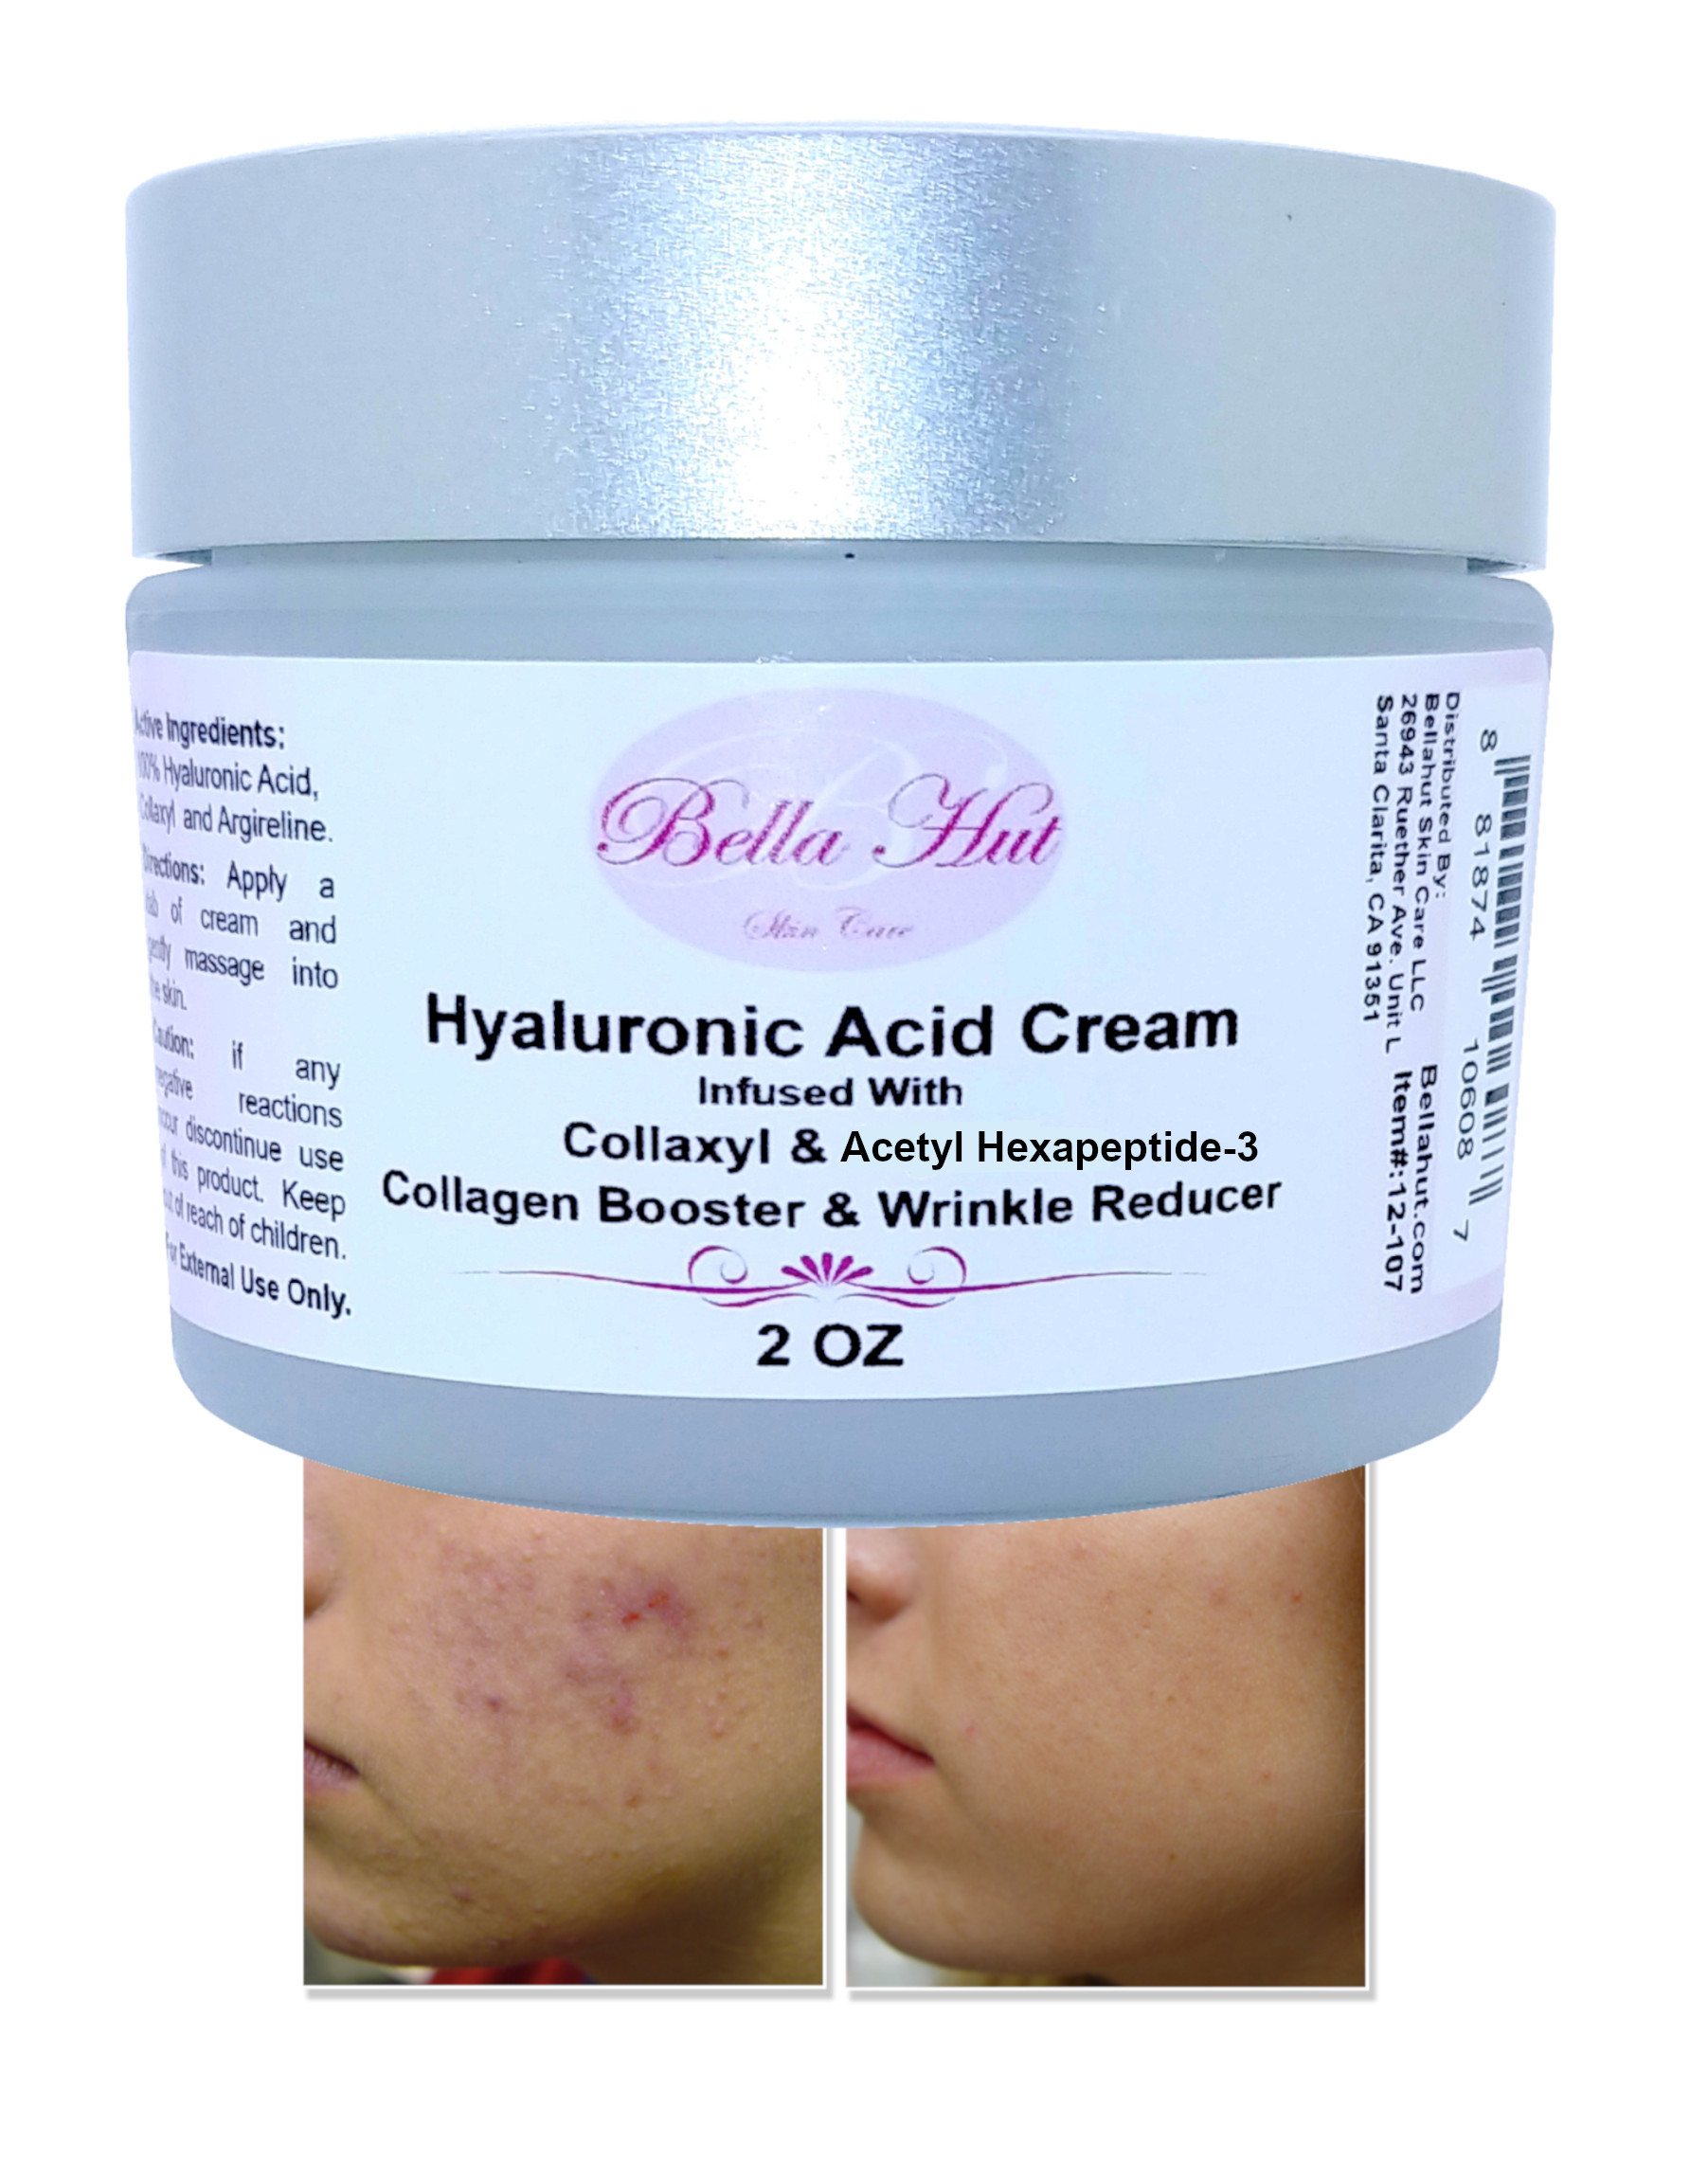 100% Hyaluronic Acid Cream with Collaxyl and Acetyl hexapeptide-3 